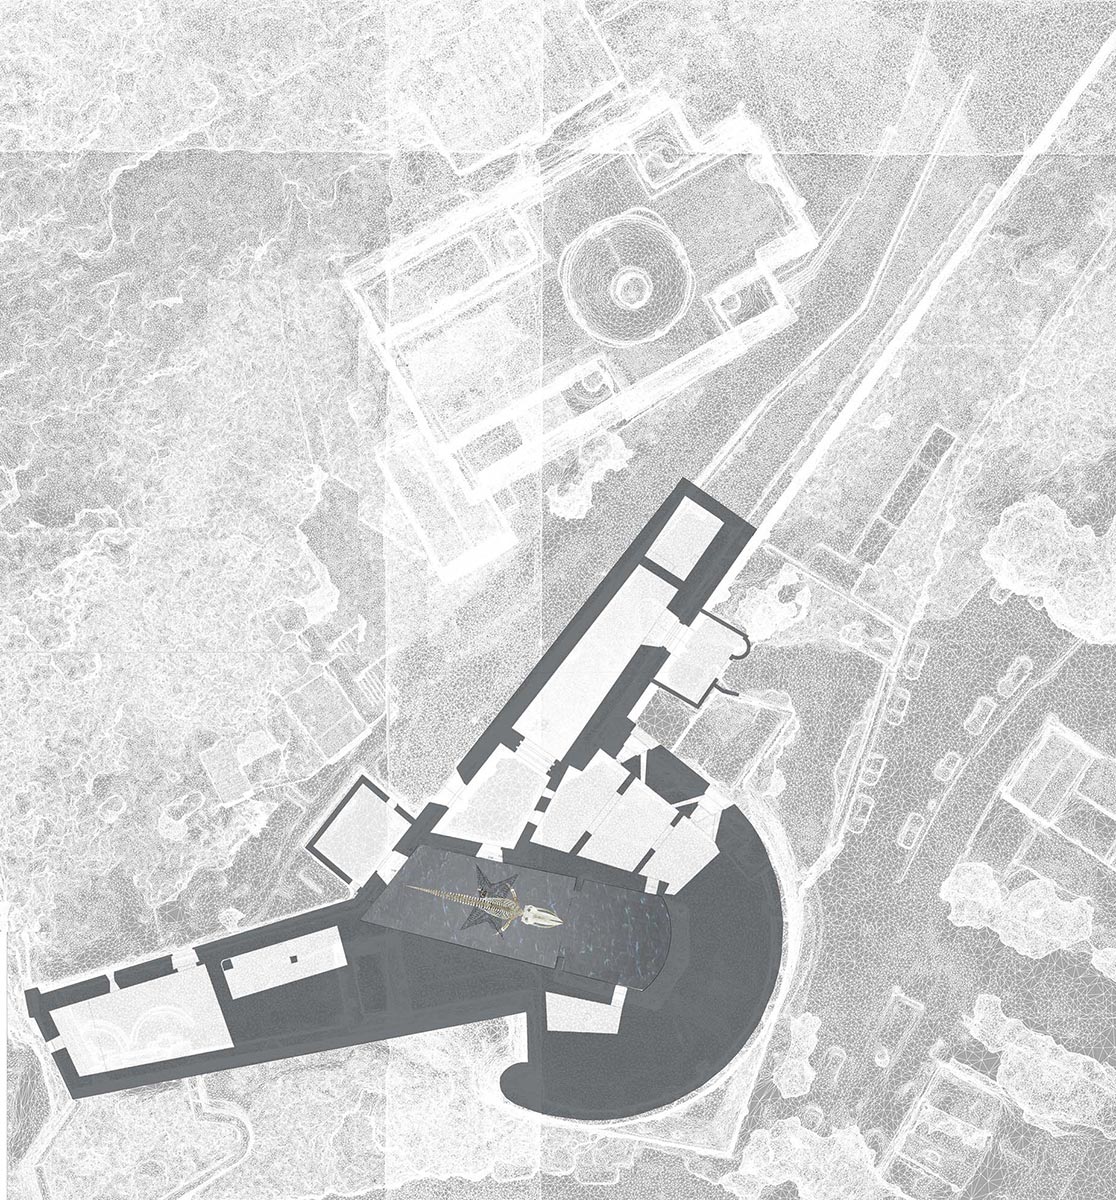 Merethe Granhus Drone Scan and Site Plan